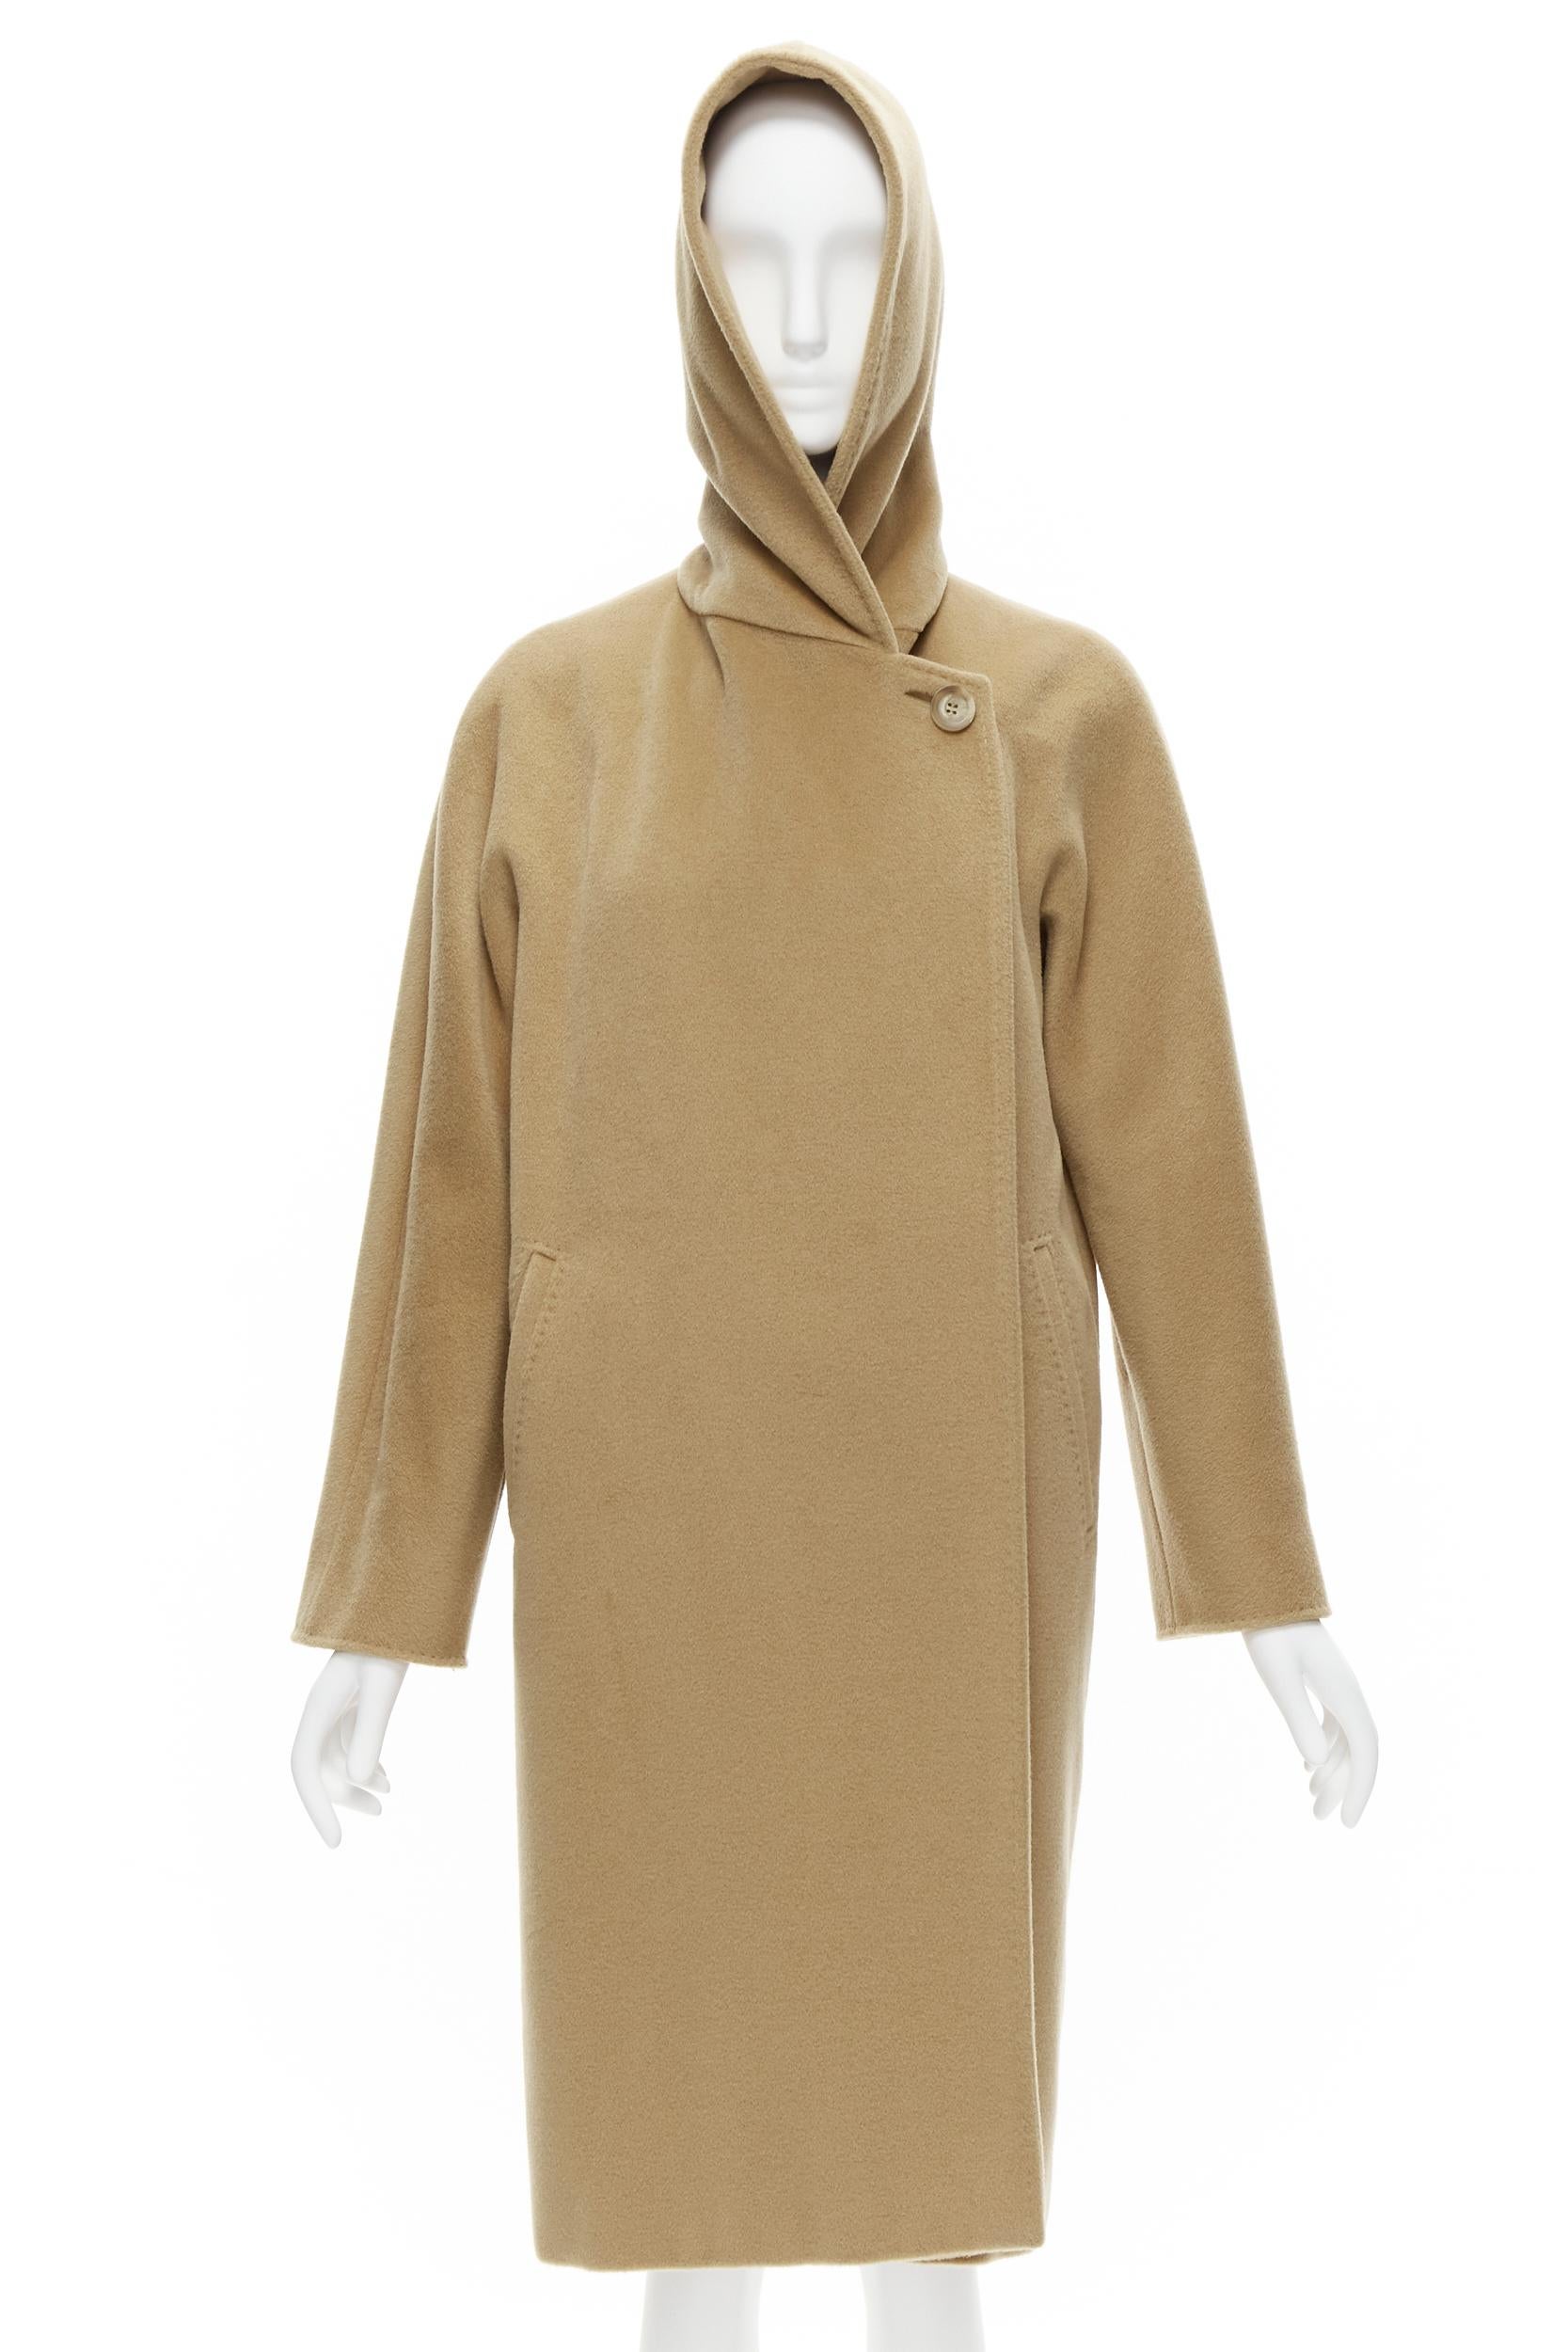 MAX MARA camel tan brown virgin wool cashmere wide collar wrap front coat IT38 S
Reference: TGAS/C02030
Brand: Max Mara
Material: Virgin Wool, Cashmere
Color: Tan Brown
Pattern: Solid
Closure: Button
Lining: Beige Fabric
Extra Details: Hidden button